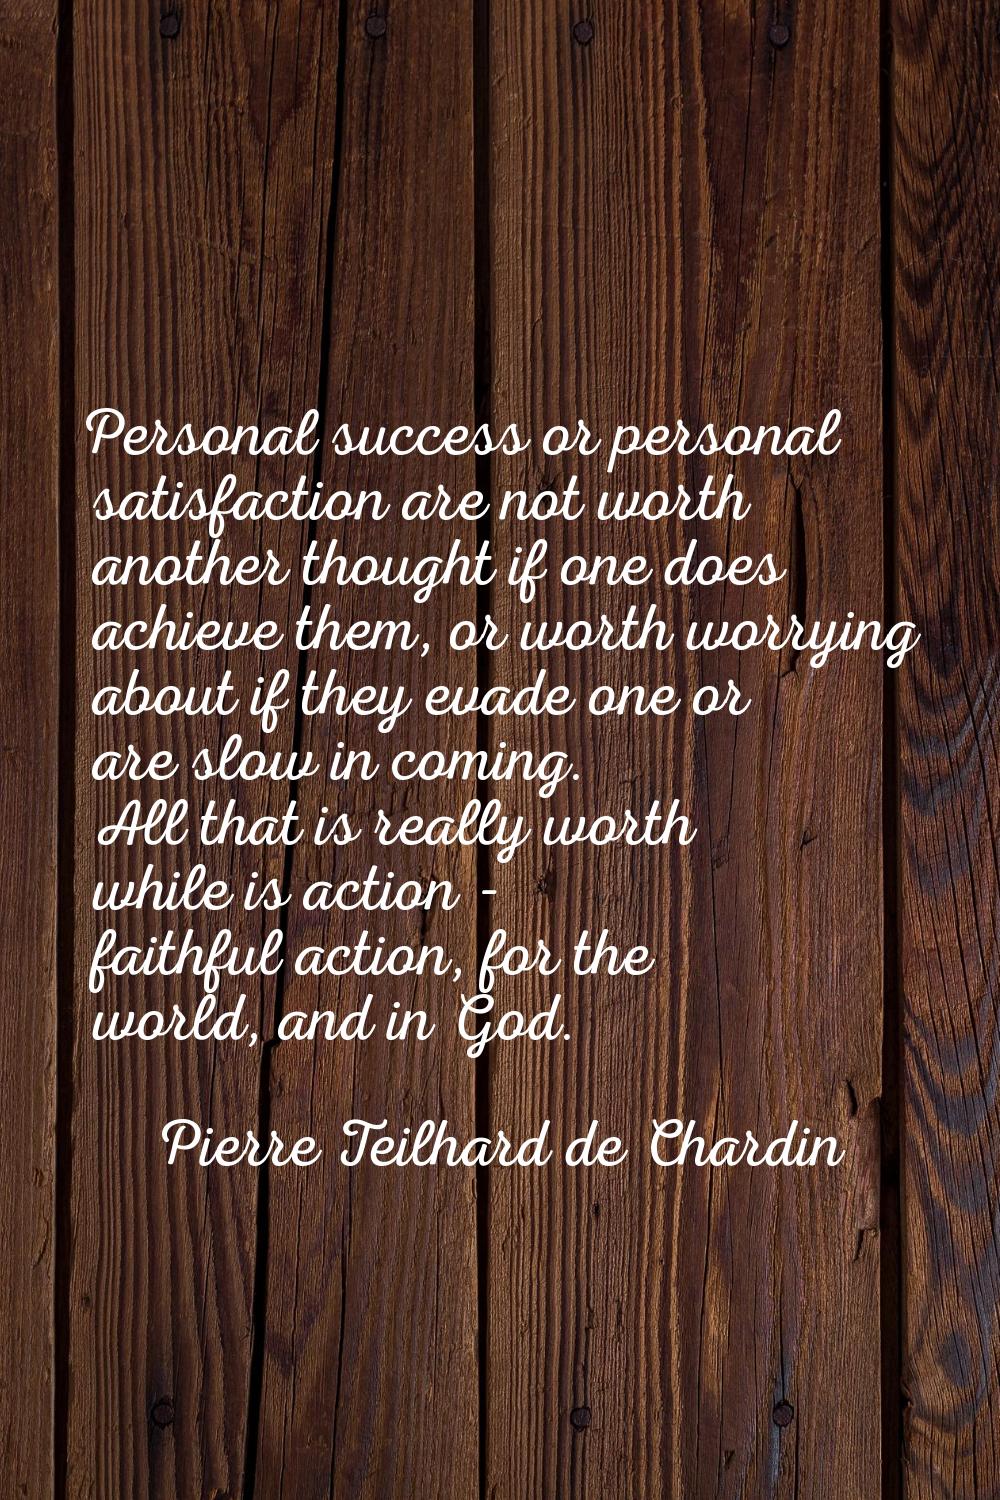 Personal success or personal satisfaction are not worth another thought if one does achieve them, o